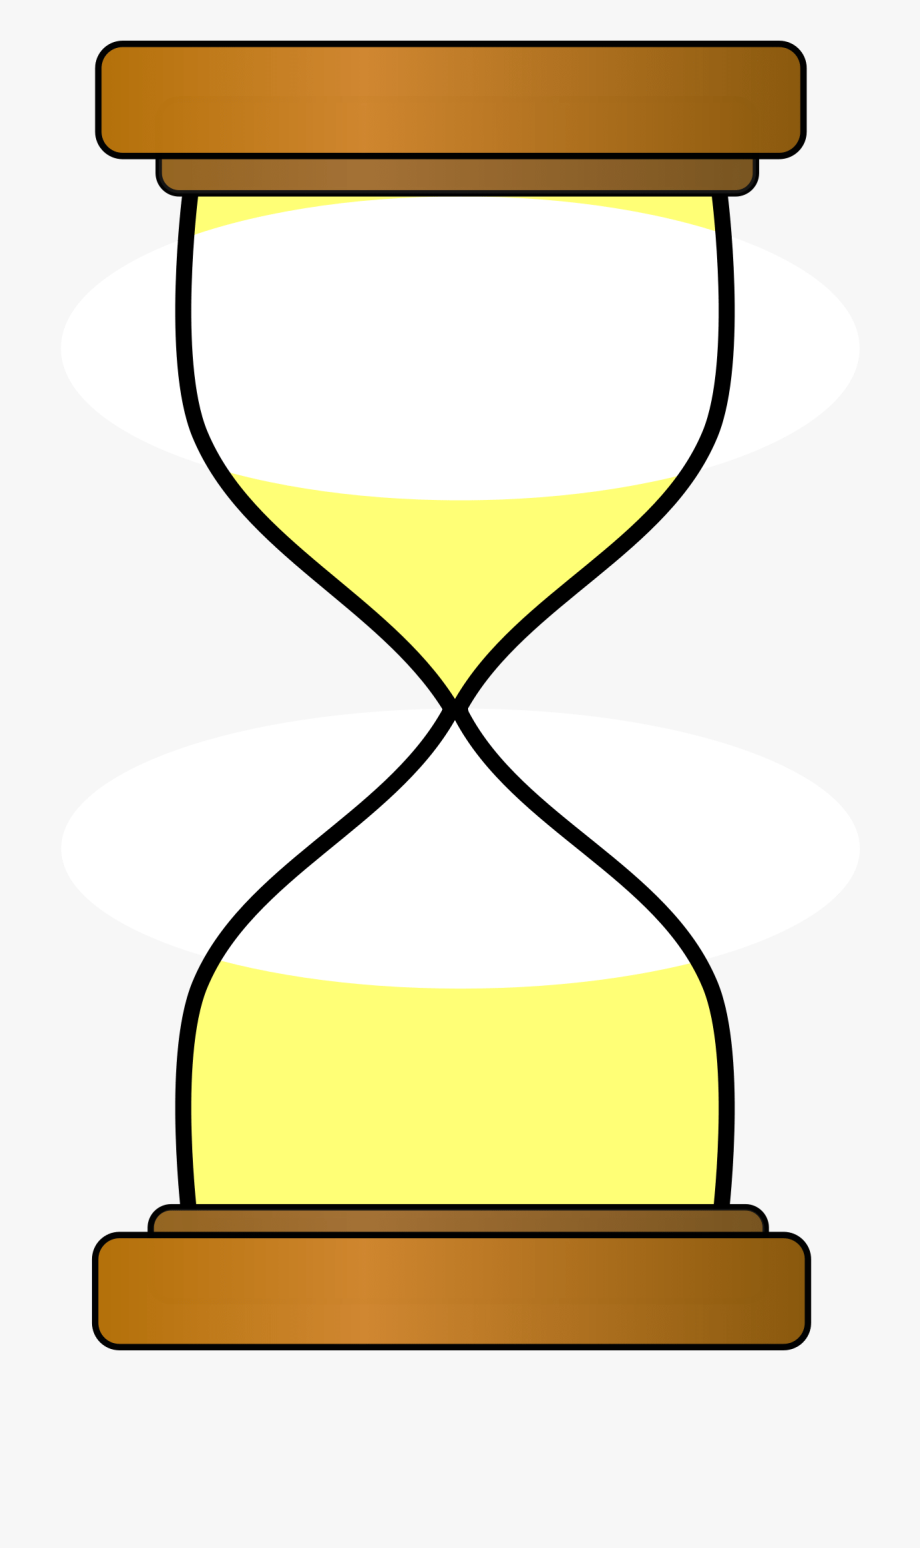 Timer clipart hourglass.